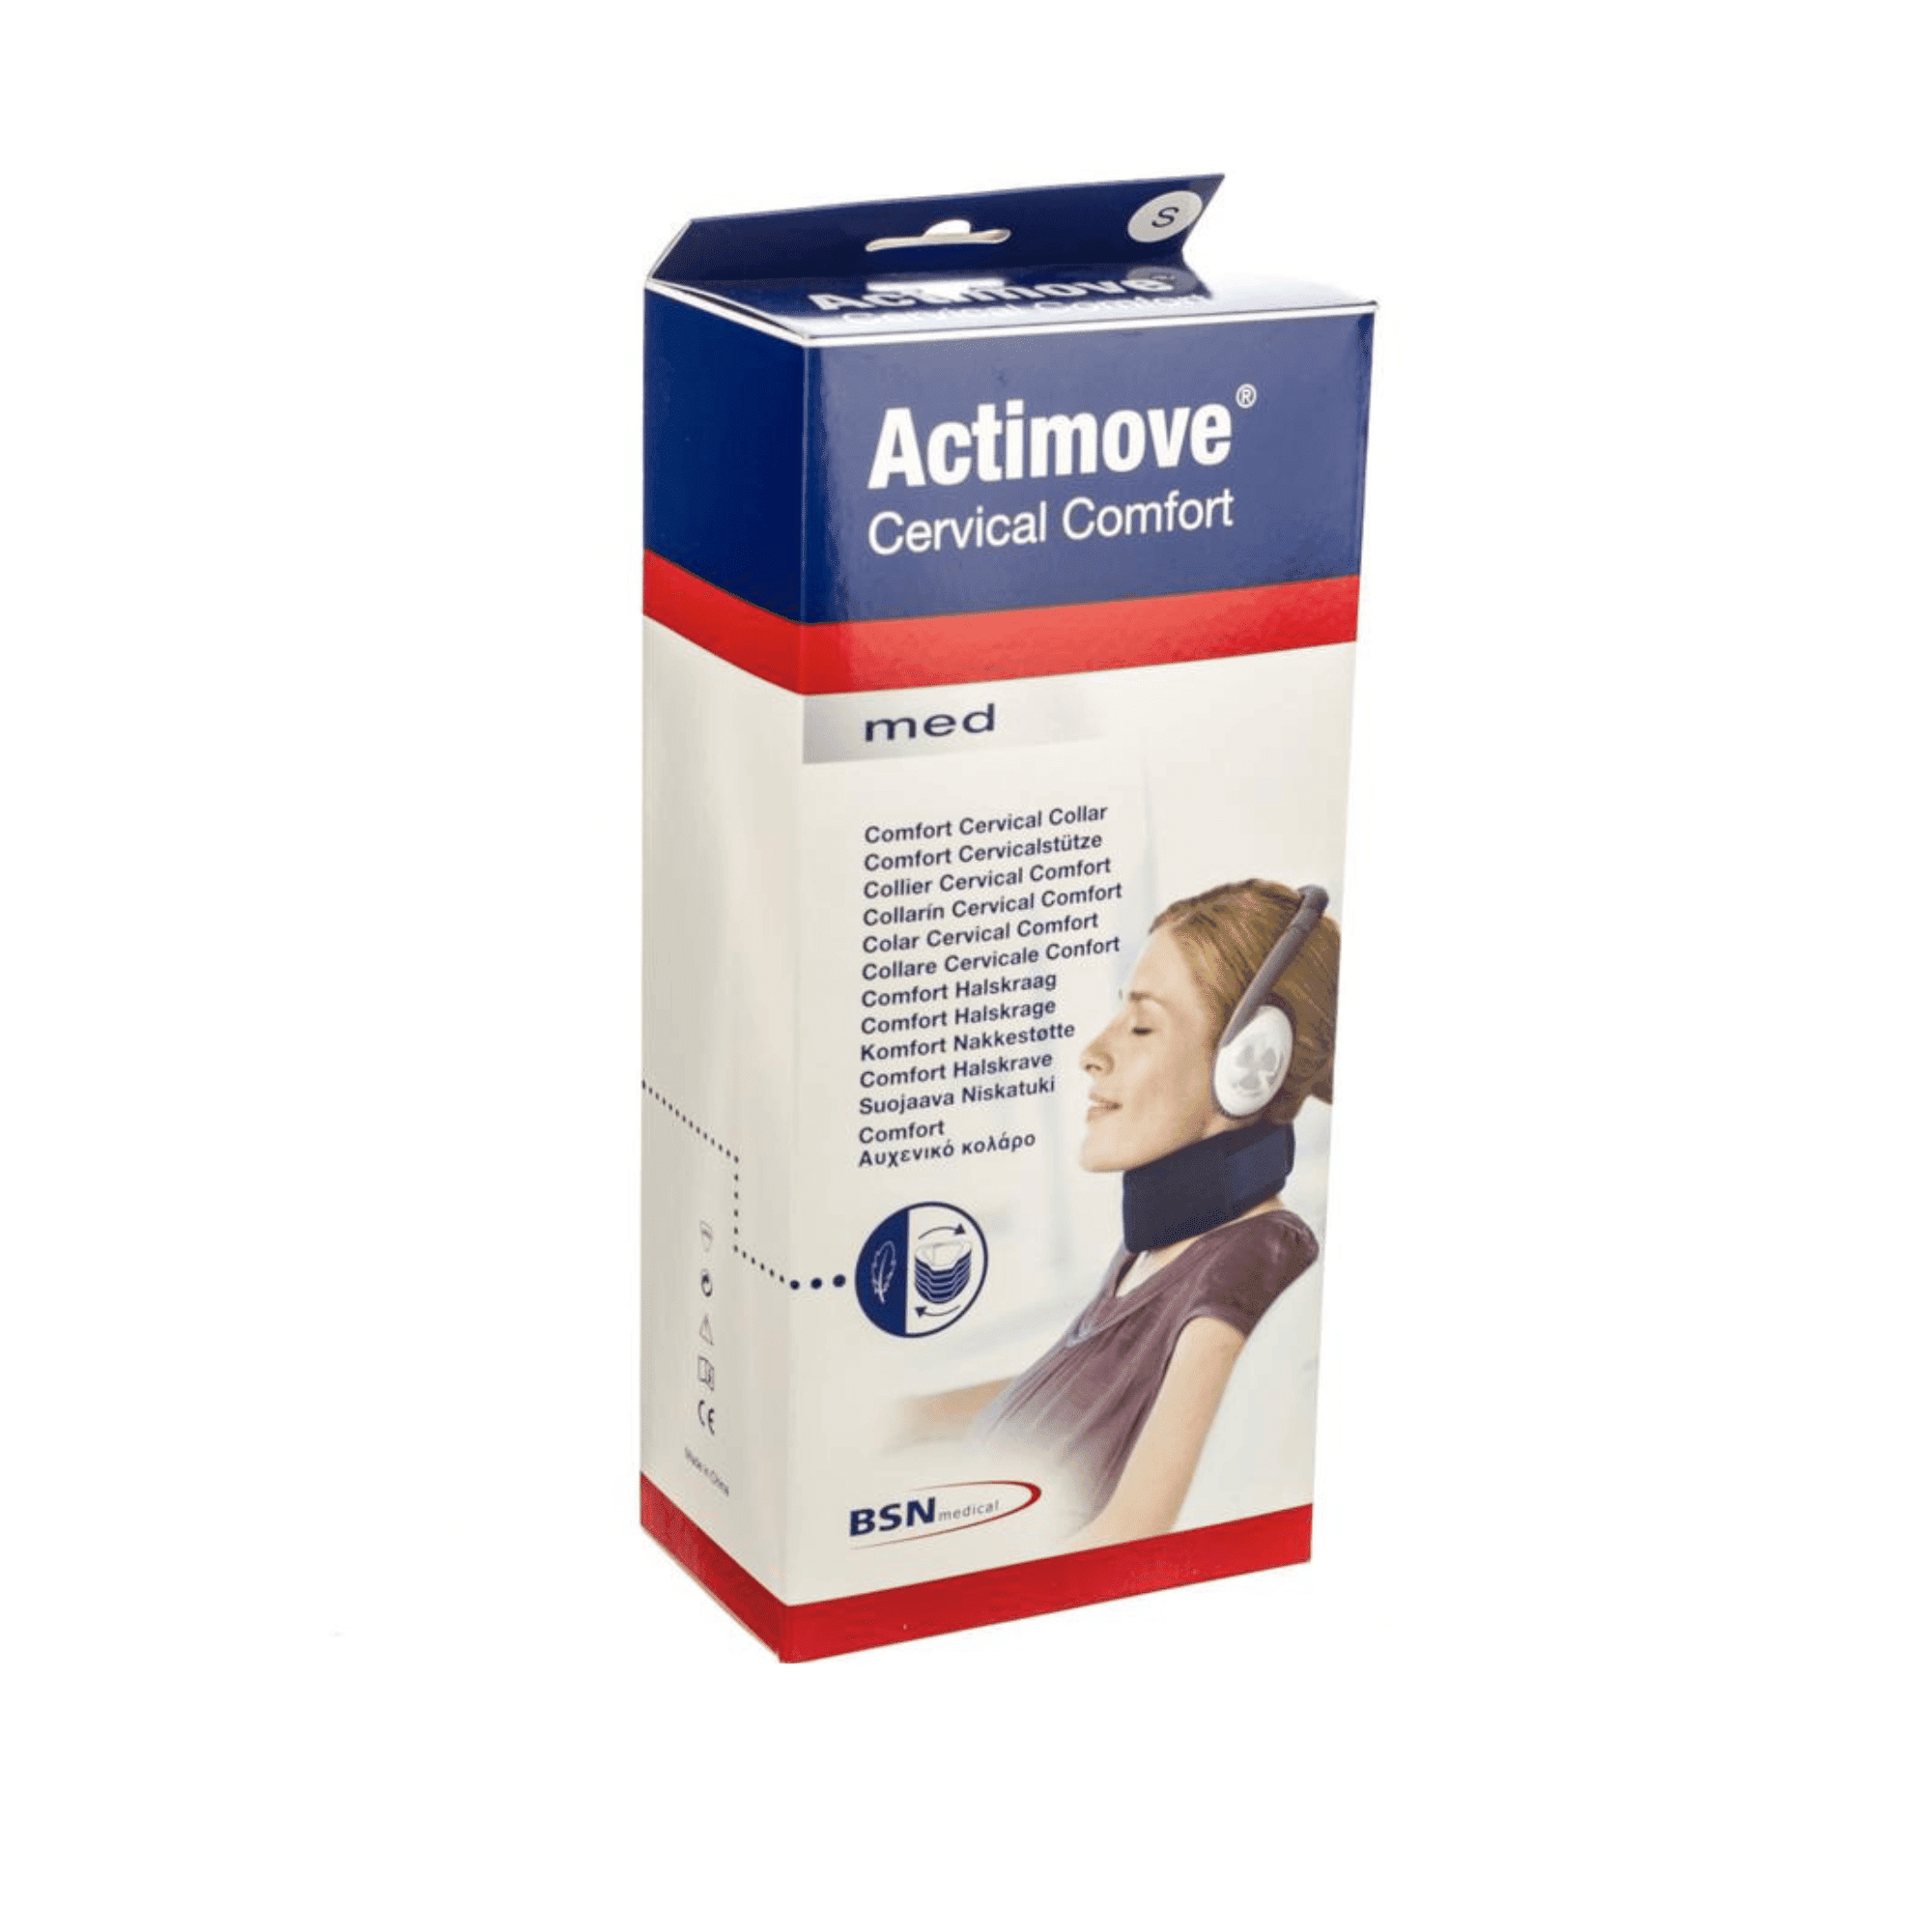 Actimove Cervical Comfort S